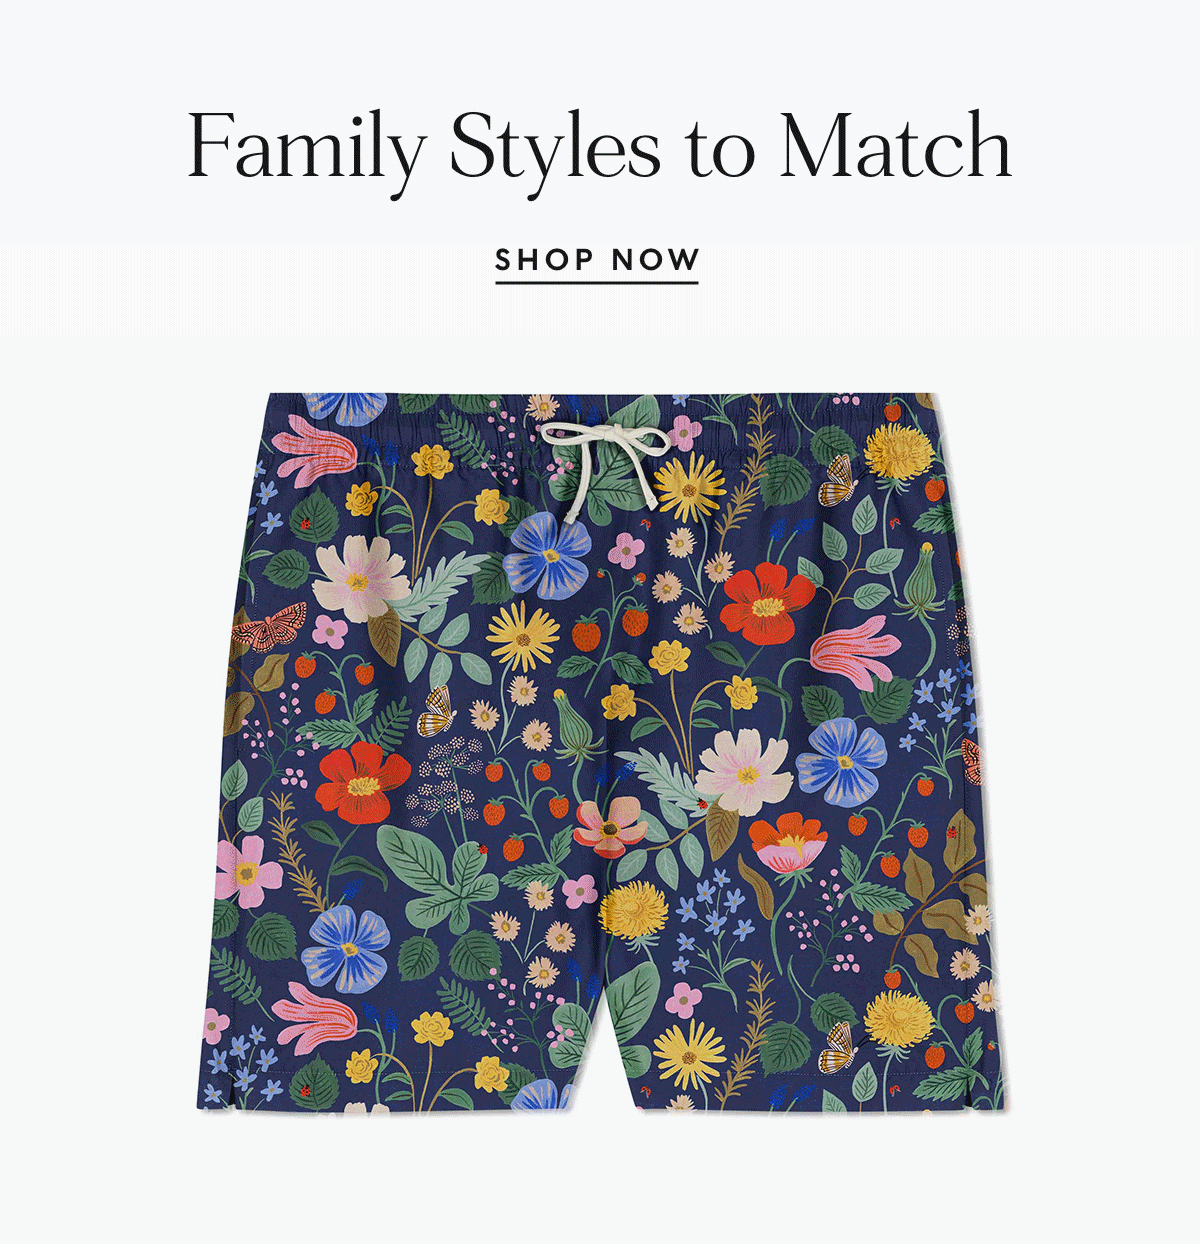 Family styles to match